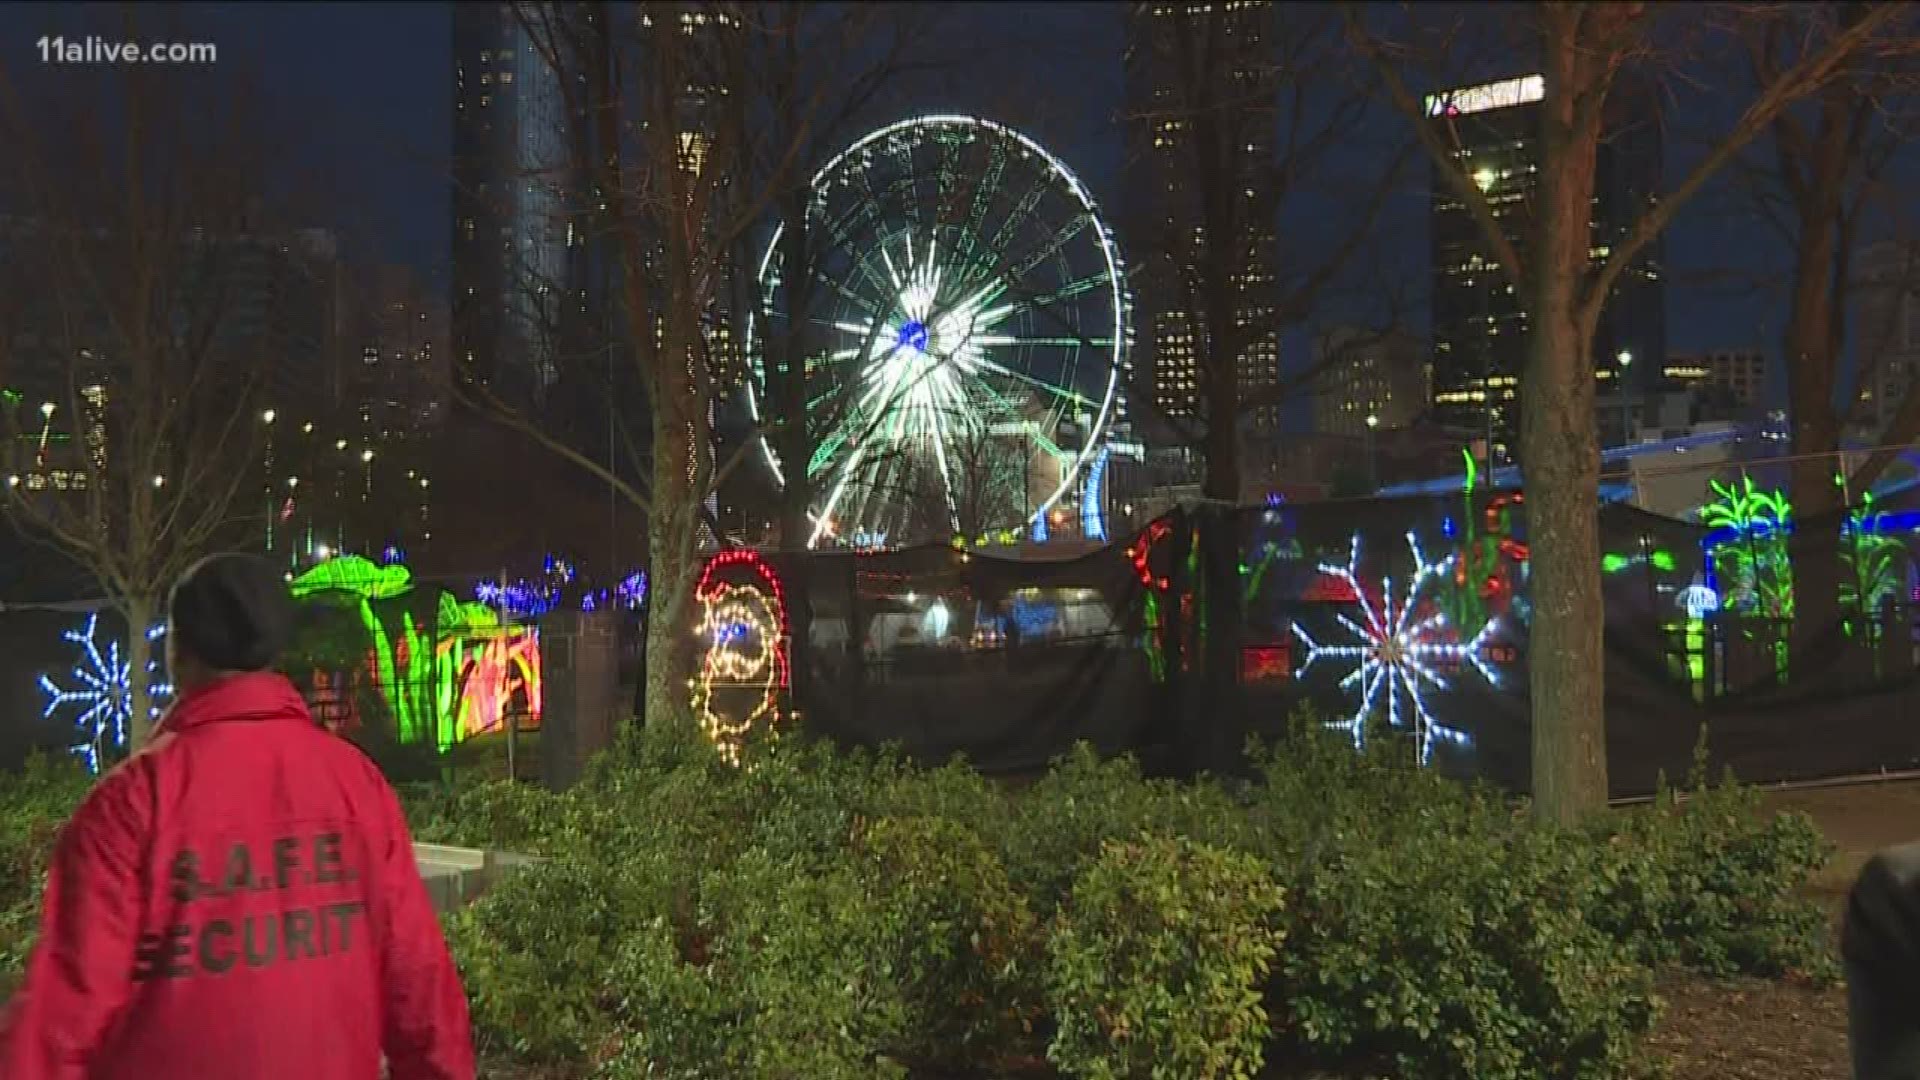 Crowds pack Christmas events in Atlanta